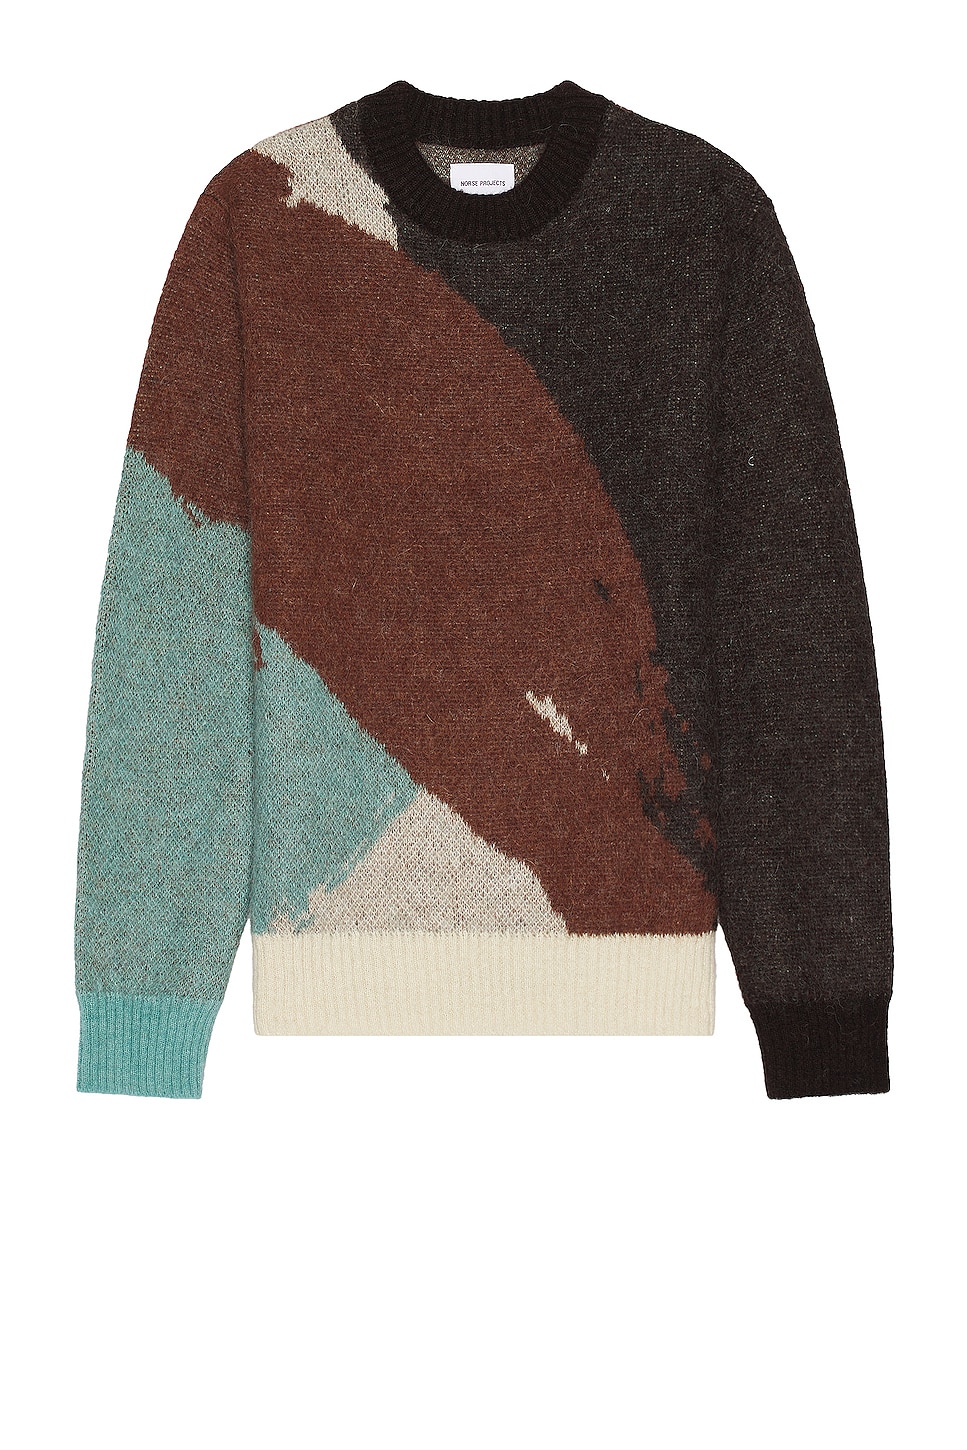 Image 1 of Norse Projects Arild Alpaca Mohair Jacquard Sweater in Espresso